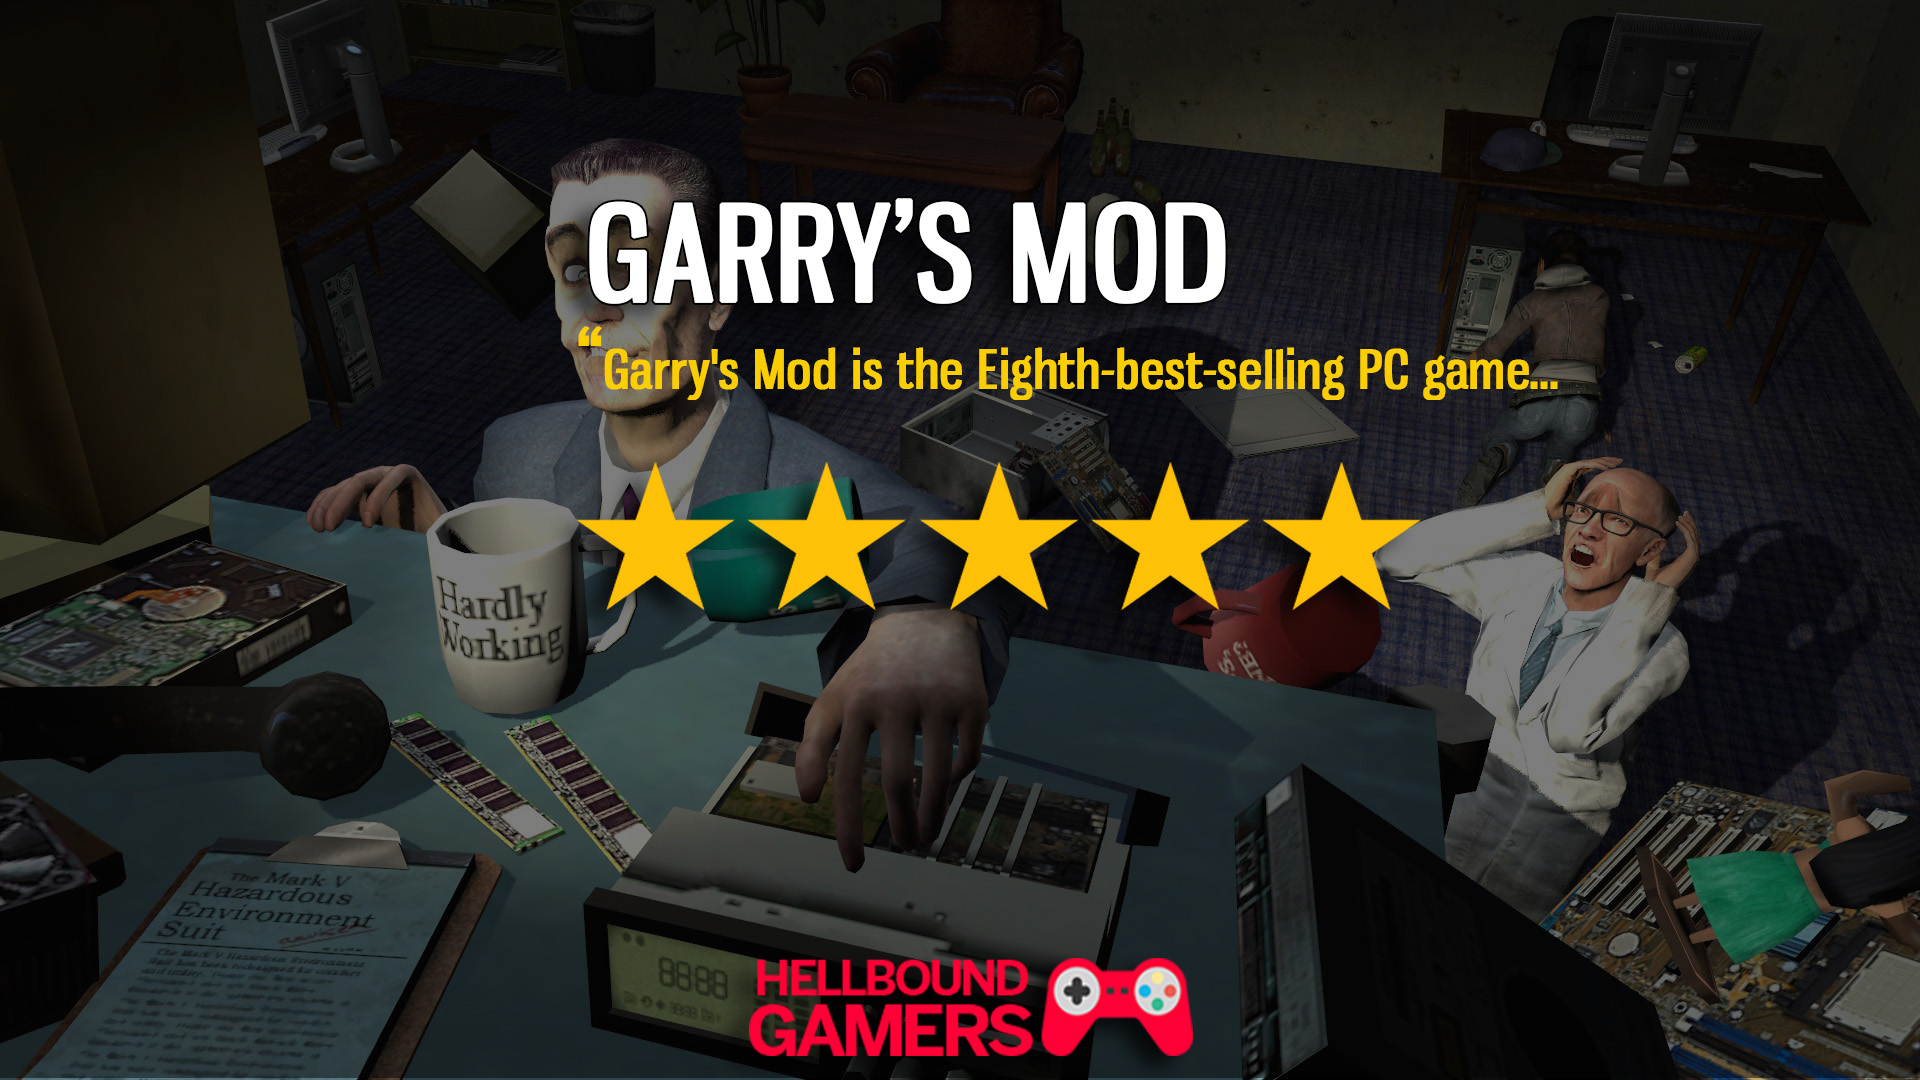 Gmod for mobiles